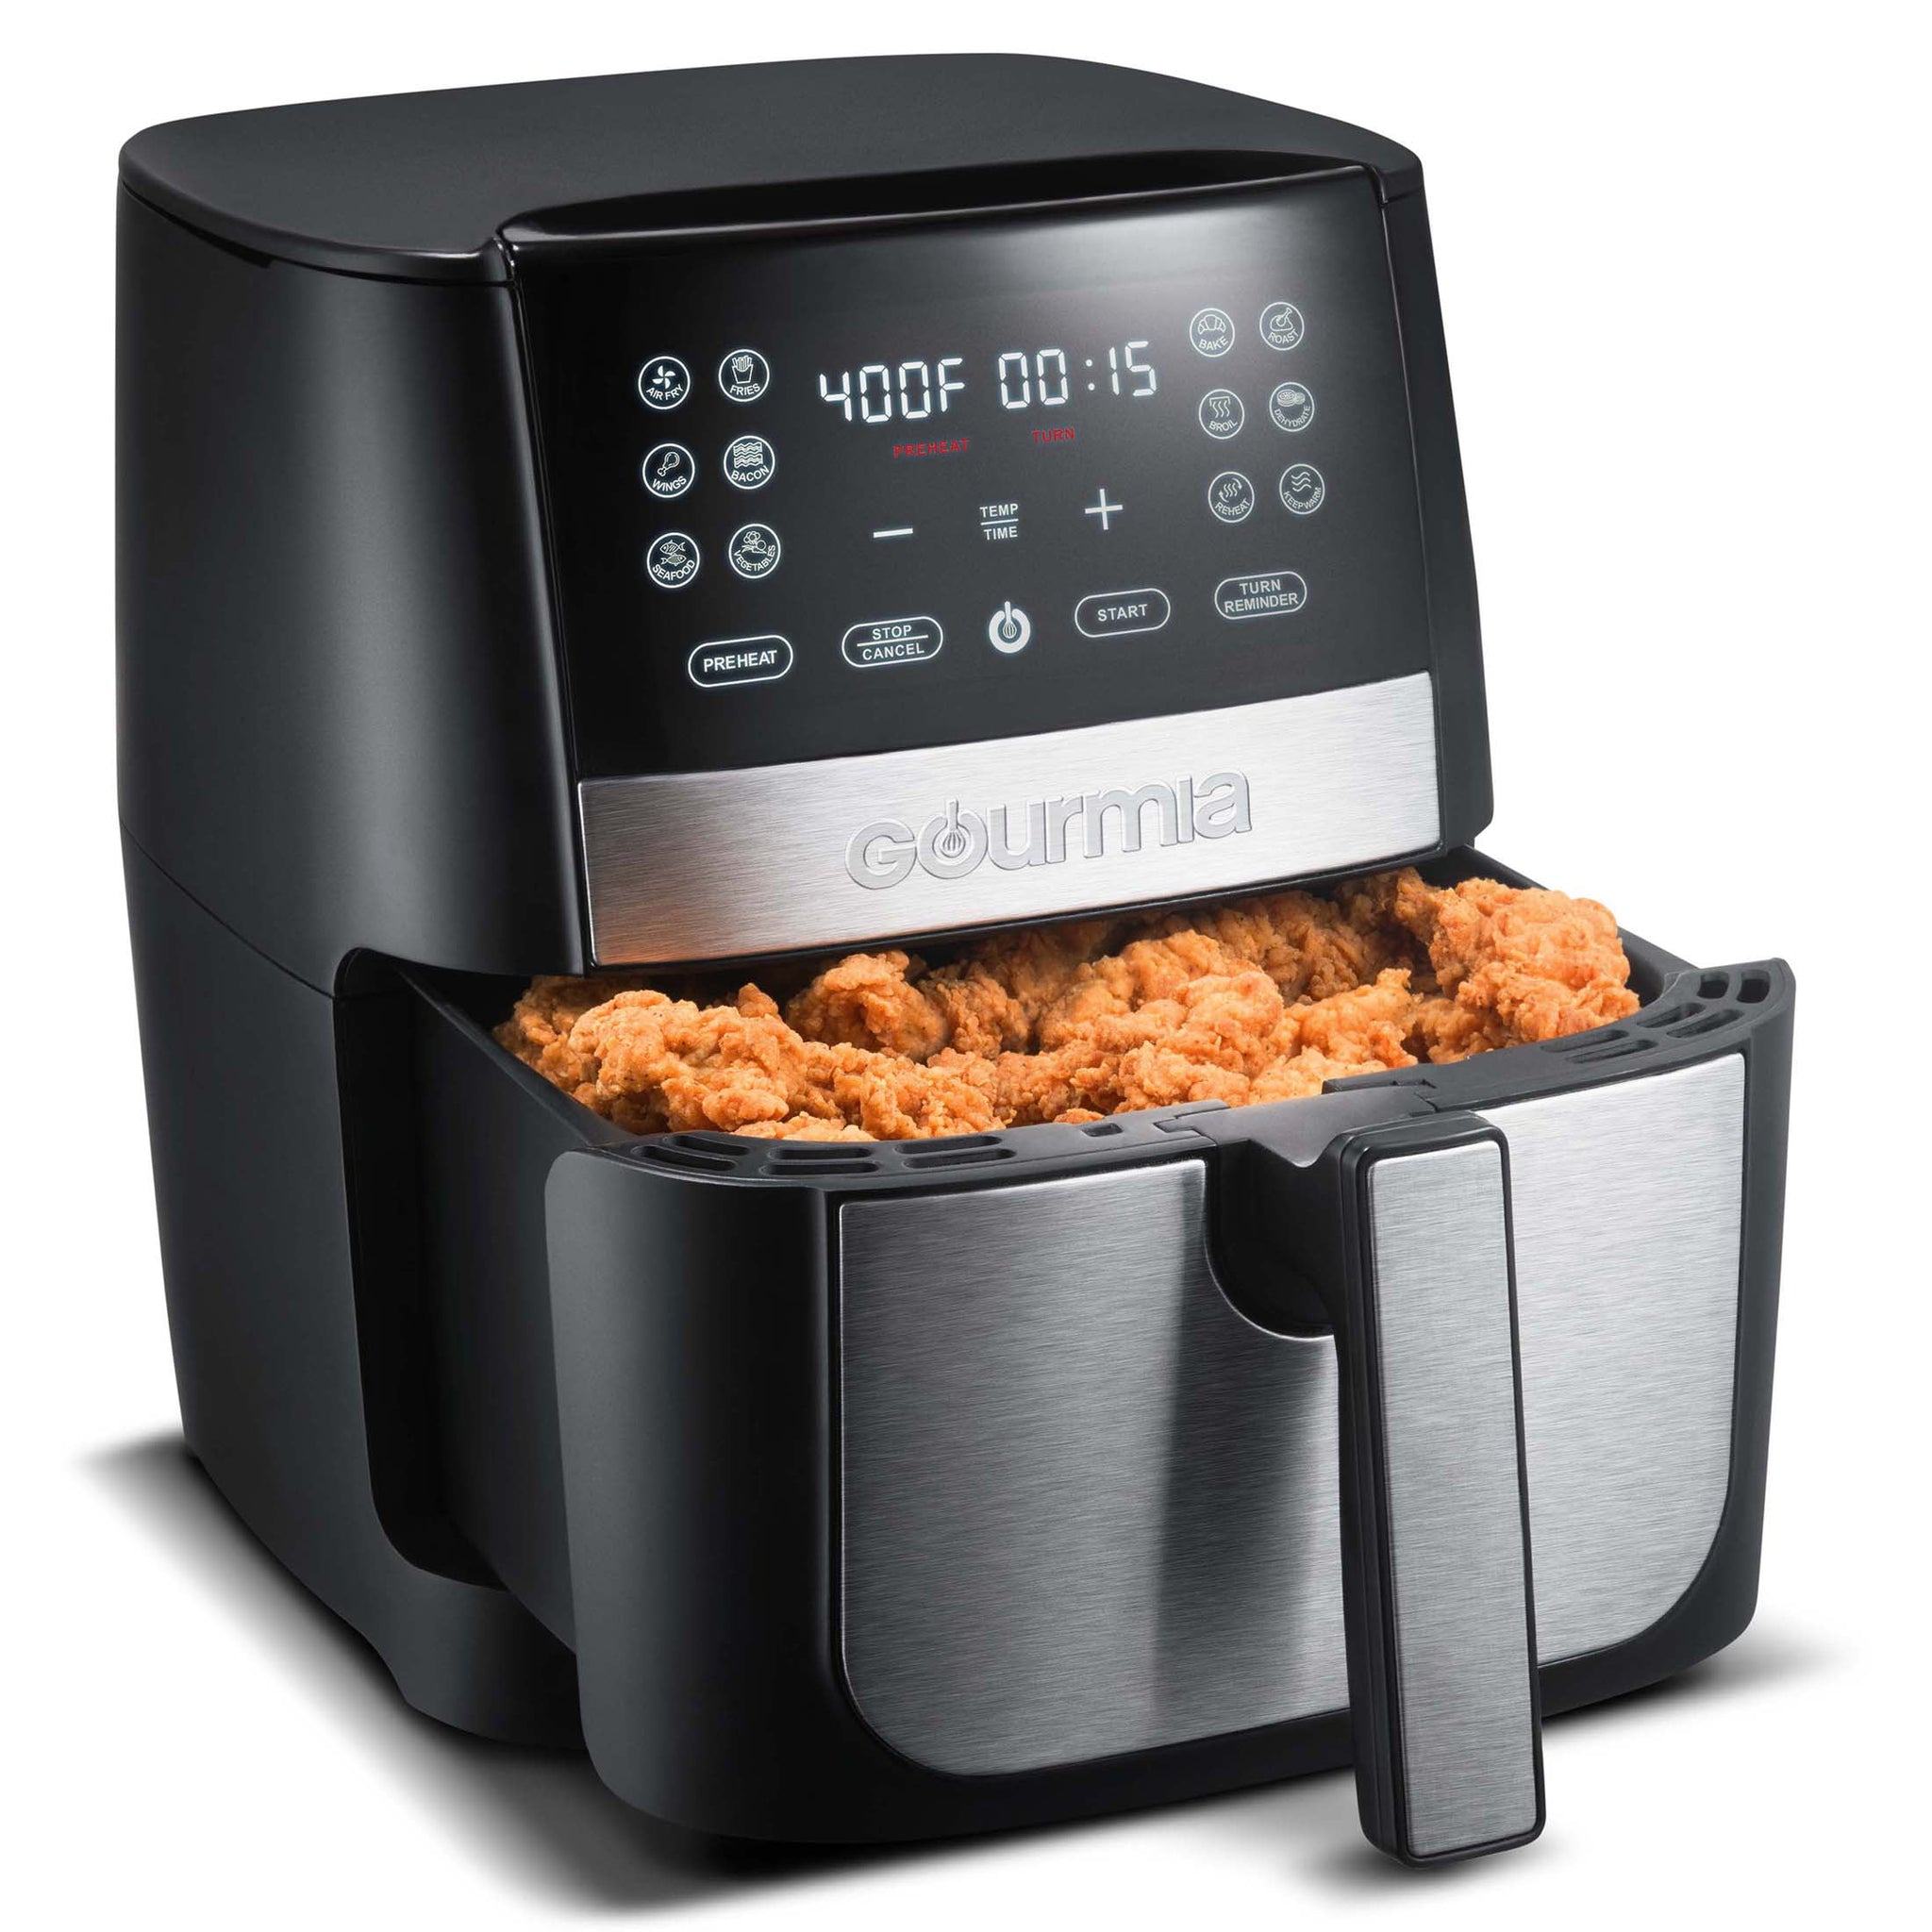 image 1 of Gourmia 8 Qt Digital Air Fryer with FryForce 360 and Guided Cooking, Black/Stainless Steel, GAF826